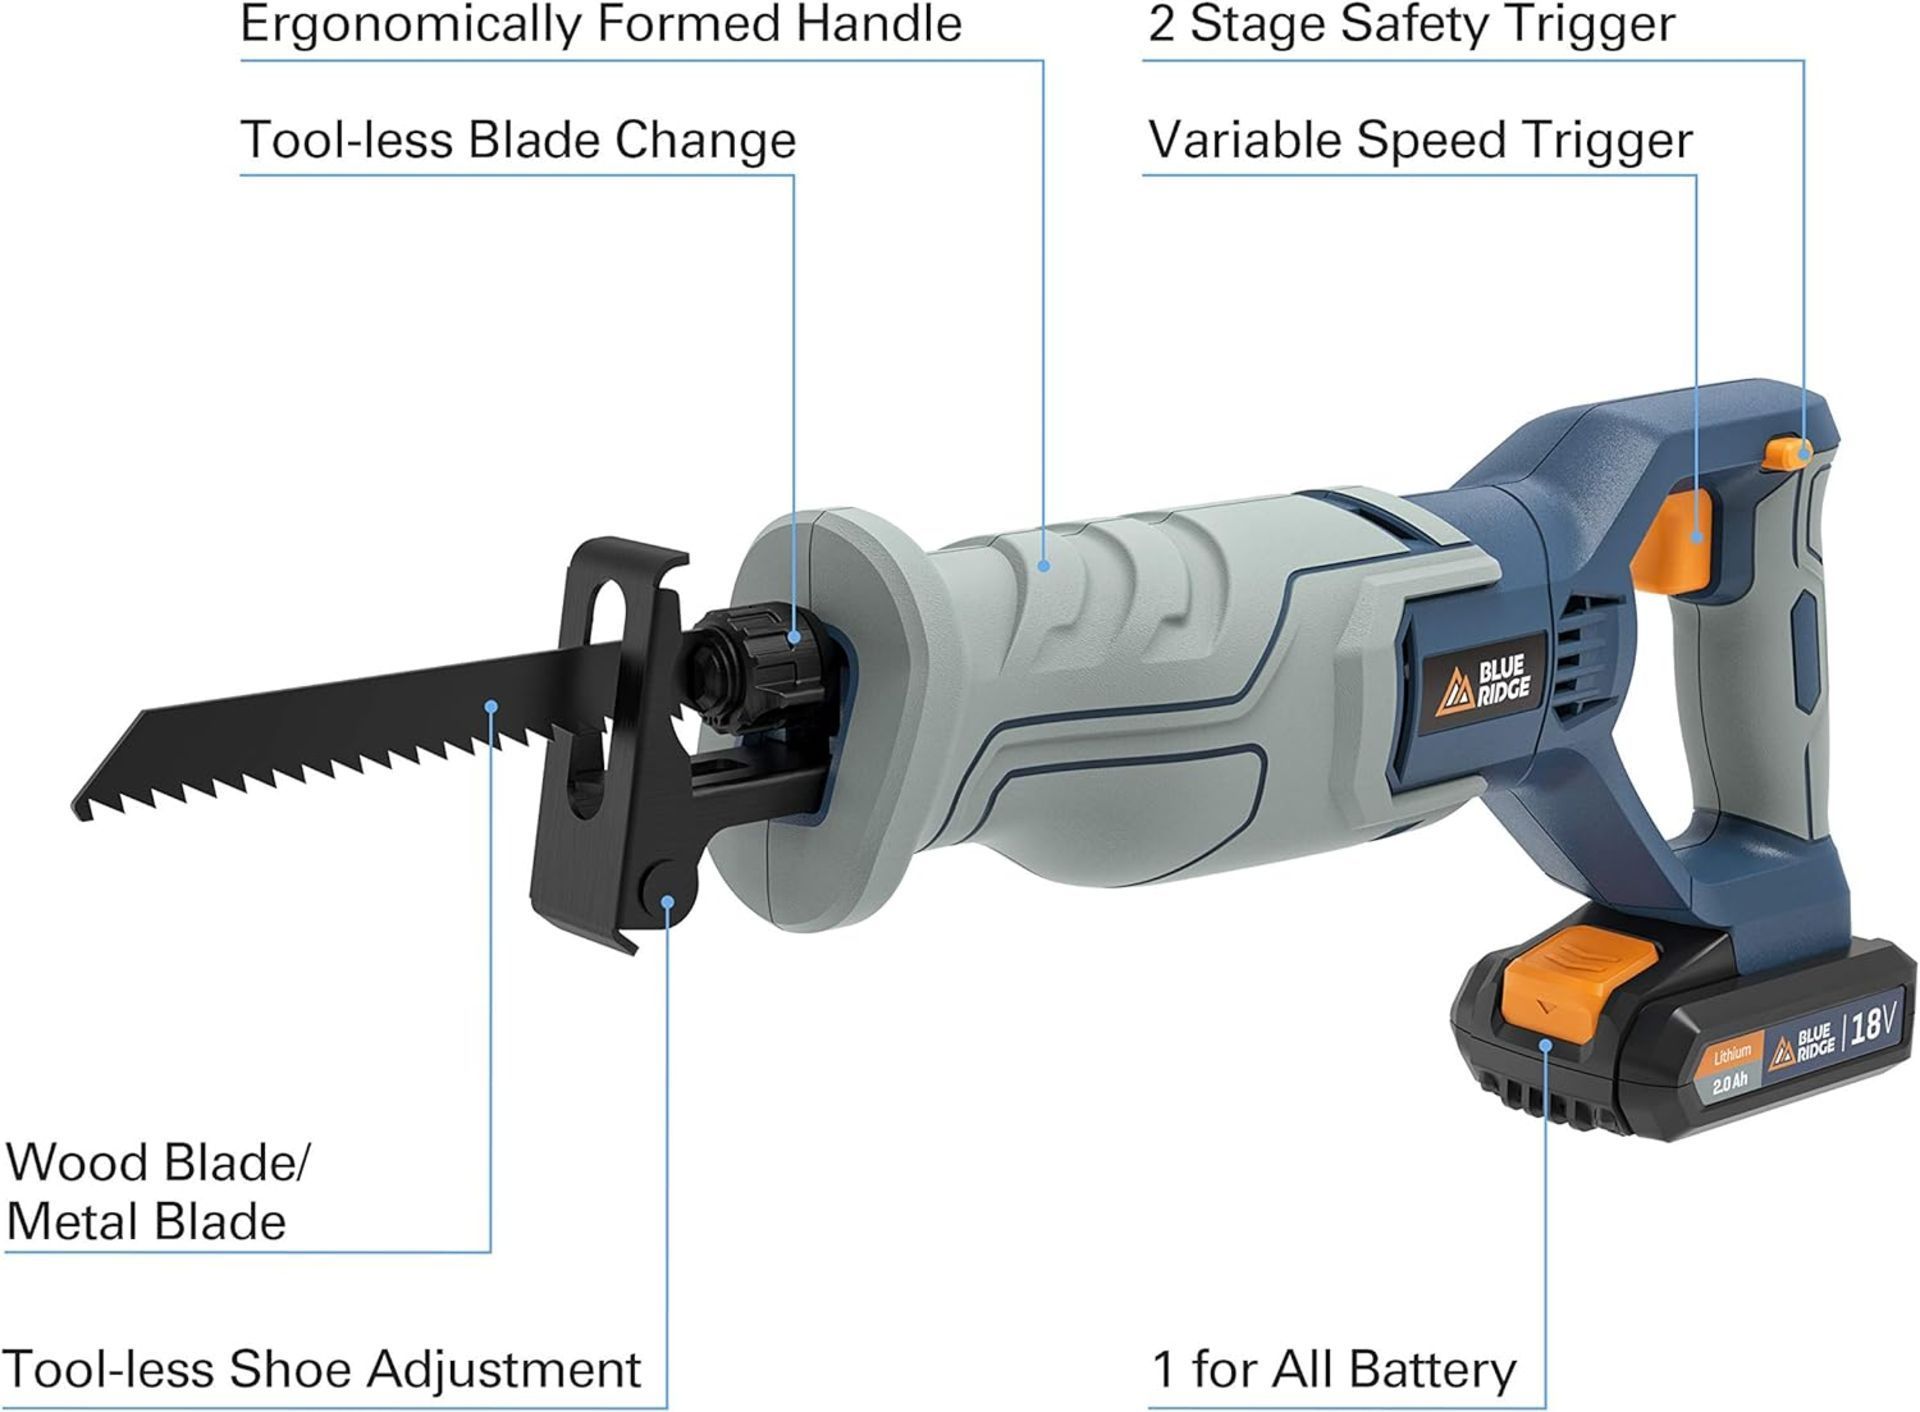 3x NEW & BOXED BLUE RIDGE 18V Reciprocating Cordless Sabre Saw with 2.0Ah Battery. RRP £99 EACH. - Image 6 of 7